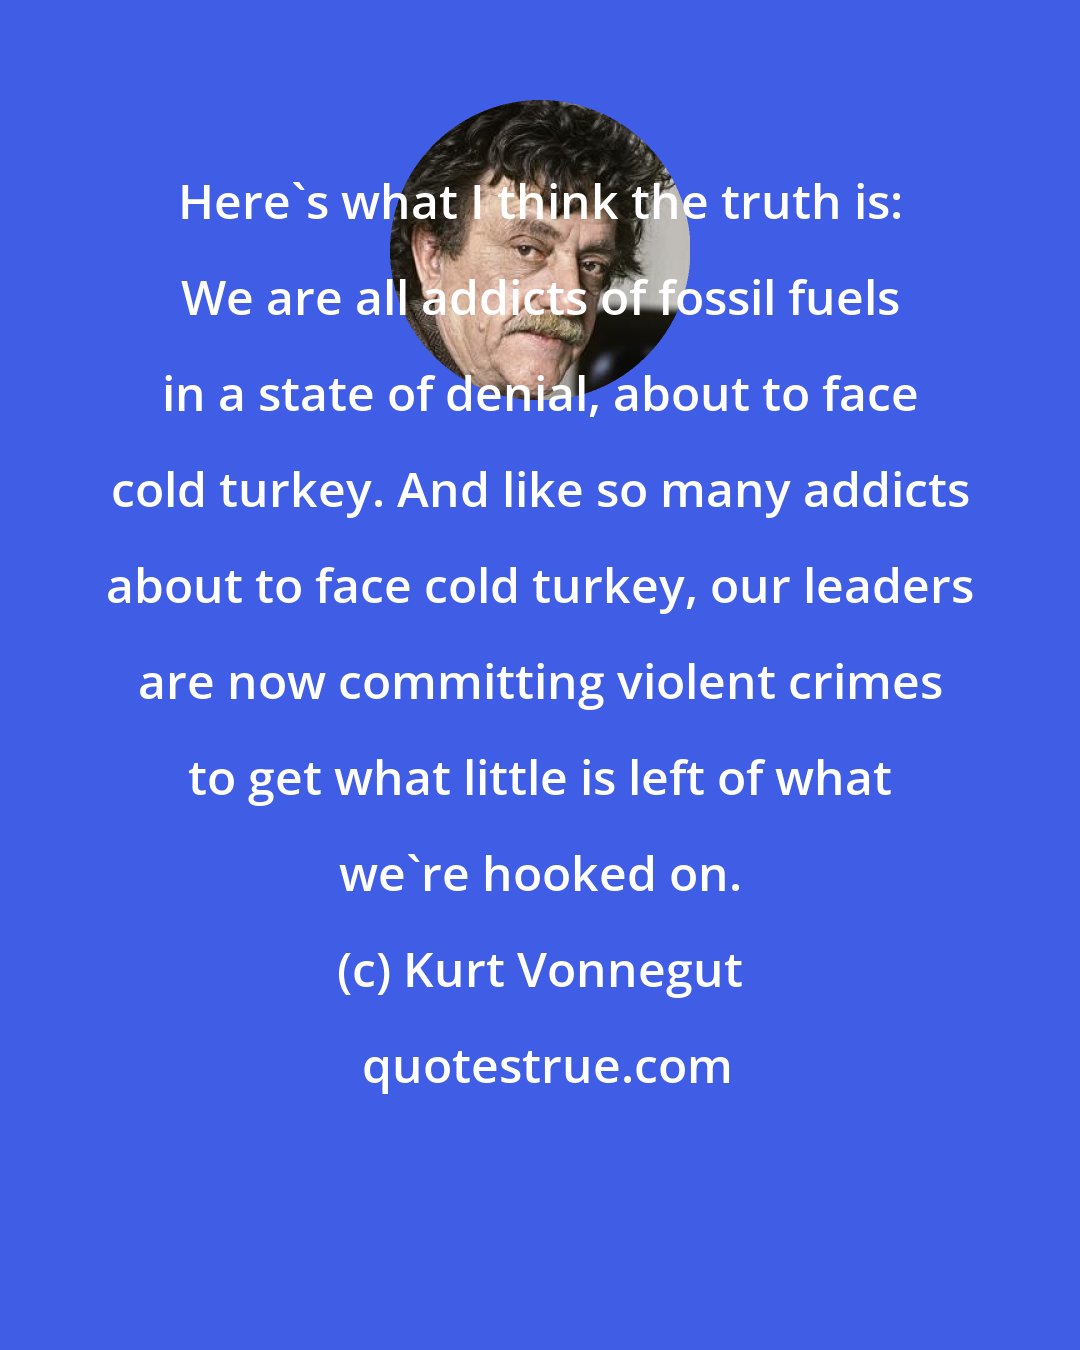 Kurt Vonnegut: Here's what I think the truth is: We are all addicts of fossil fuels in a state of denial, about to face cold turkey. And like so many addicts about to face cold turkey, our leaders are now committing violent crimes to get what little is left of what we're hooked on.